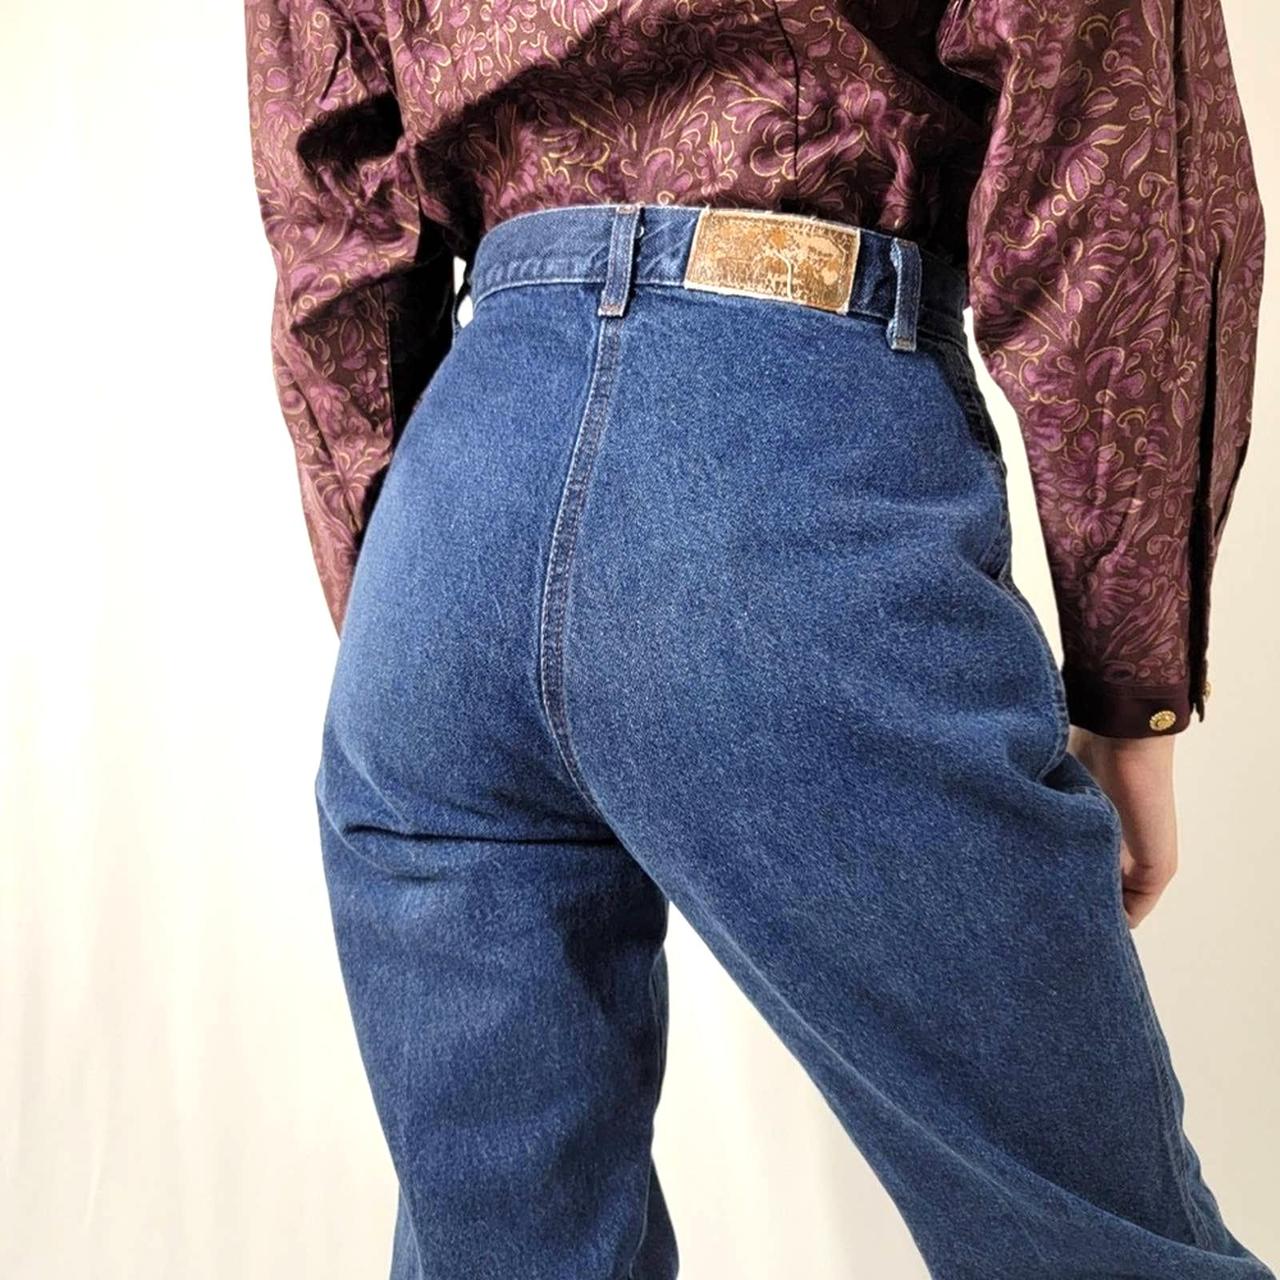 Vintage 80s High Waisted Rockies Jeans, These